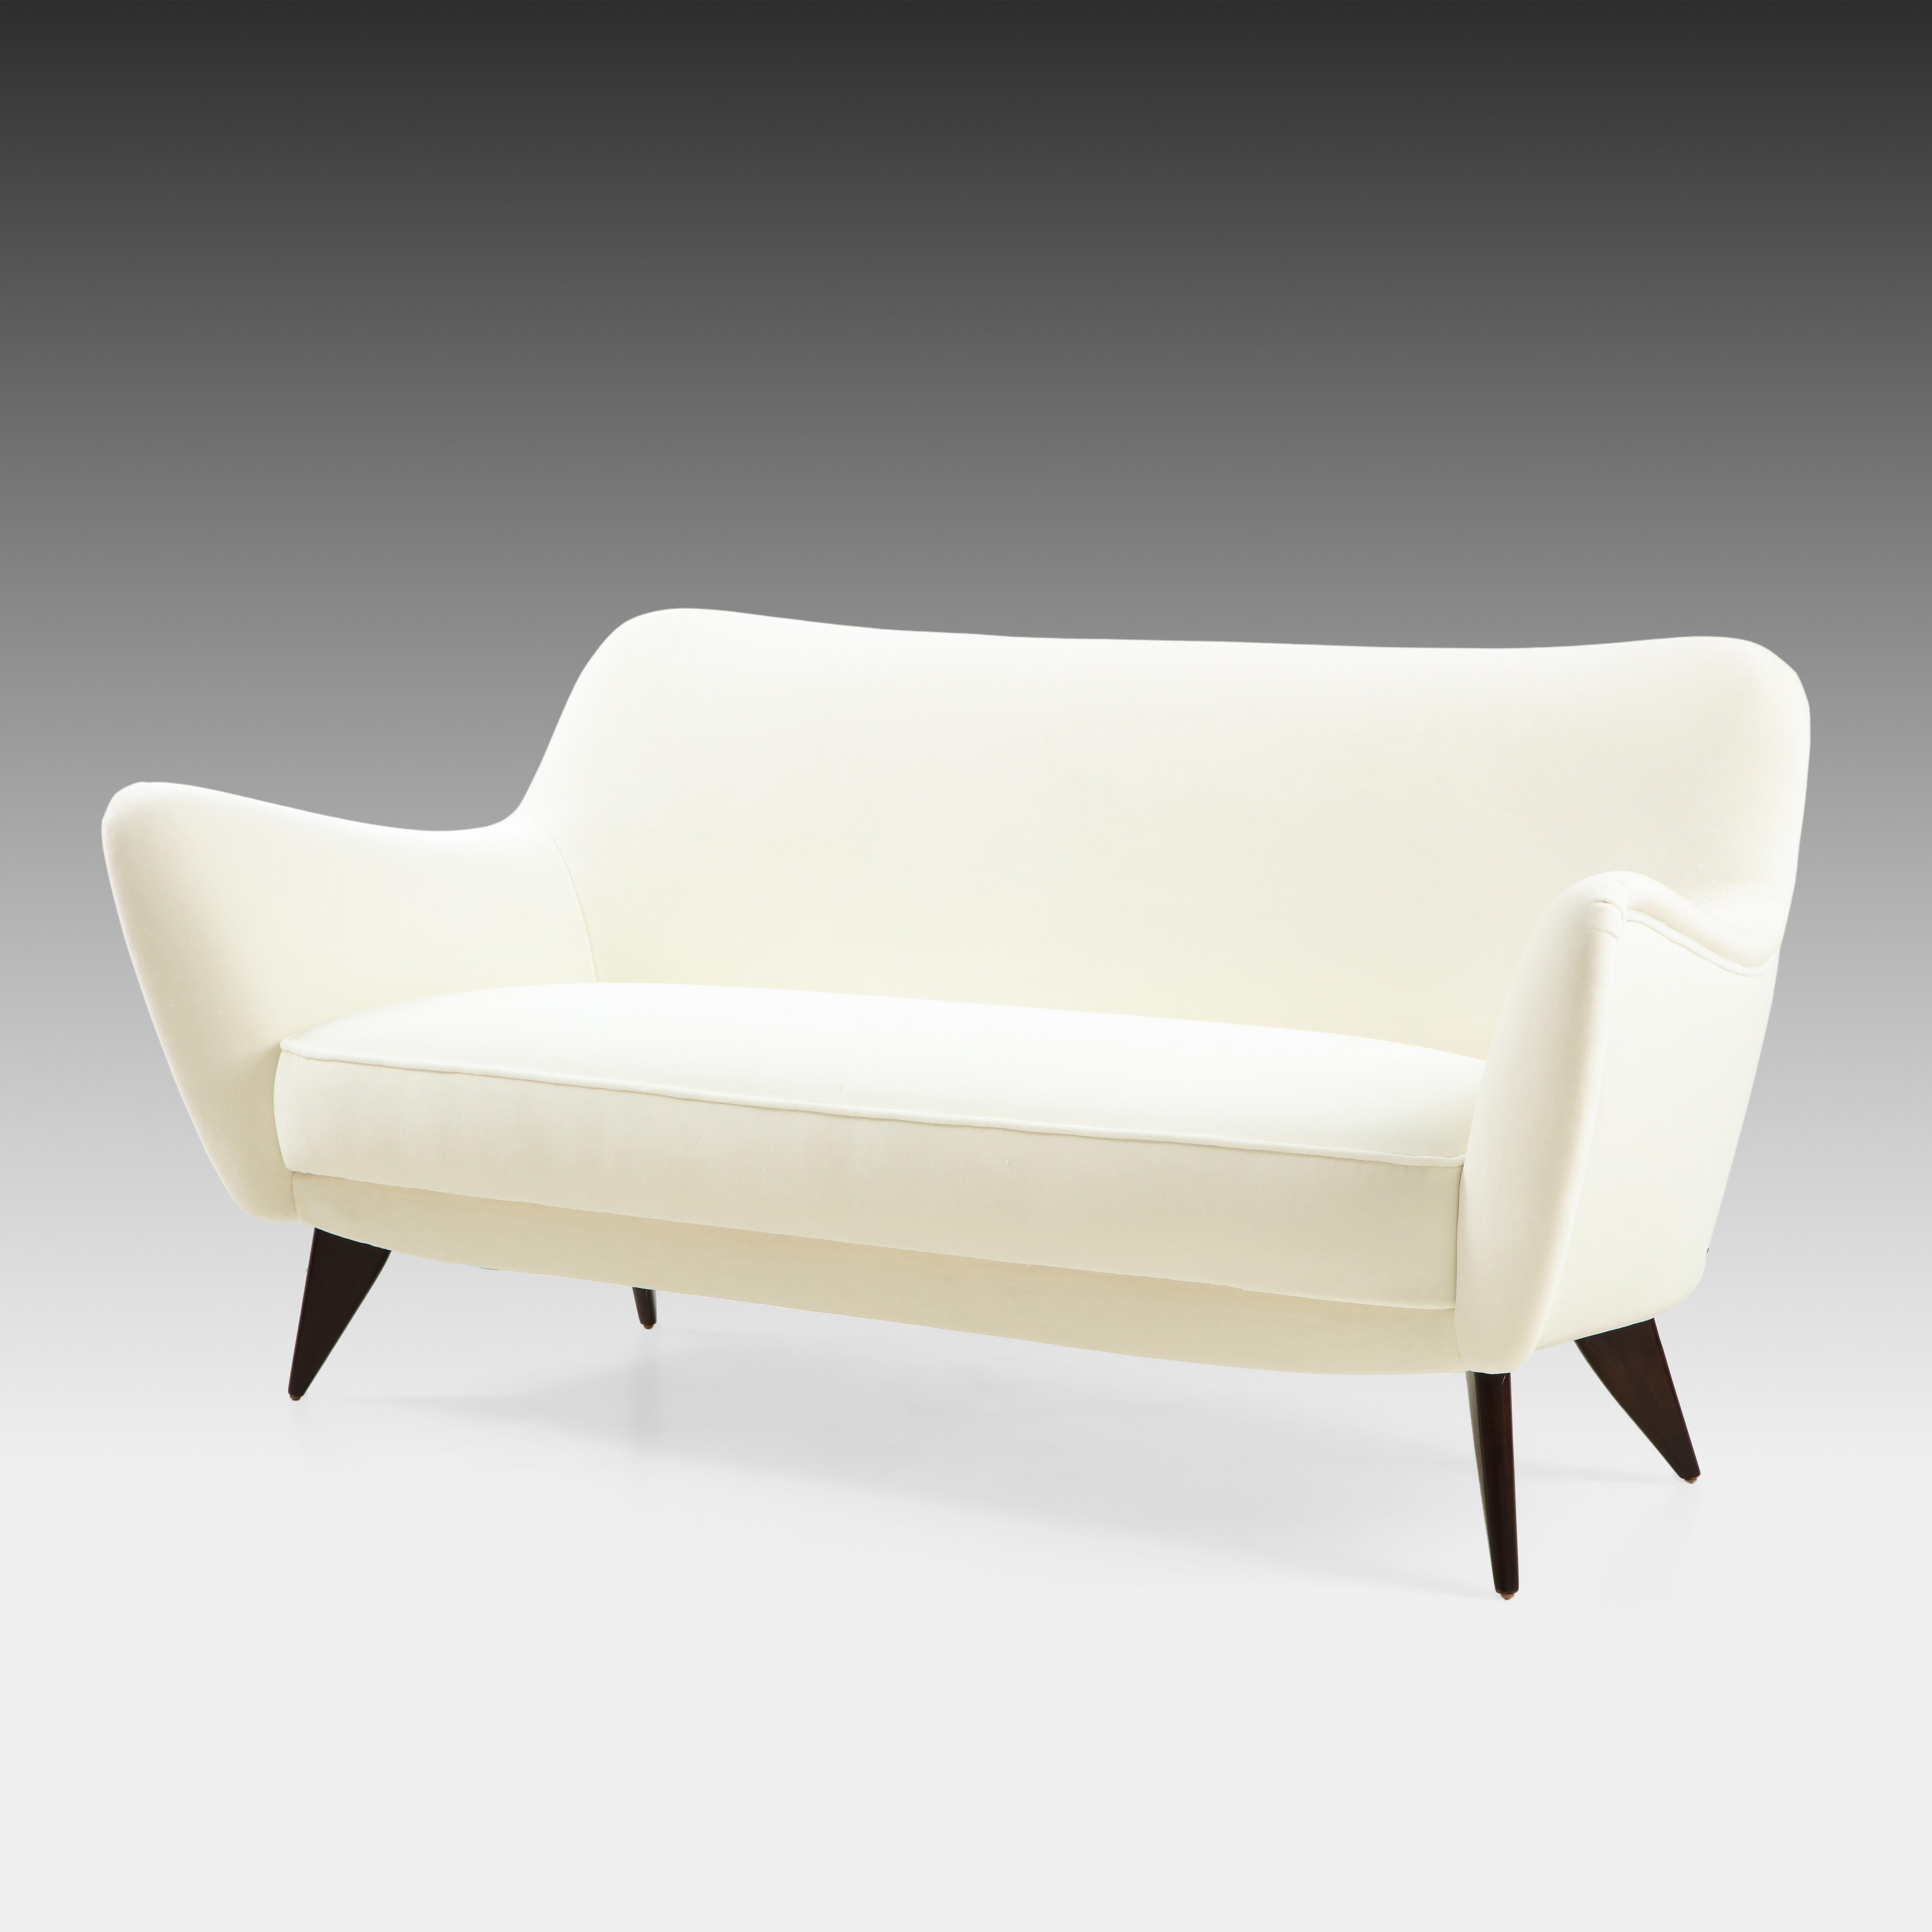 Giulia Veronisi for ISA Bergamo elegant and sculptural ivory velvet Perla sofa with slightly curved back and gently outstretched arms ending in signature sharply tapered flat triangular walnut legs, Italy, 1950s. This chic model features beautiful